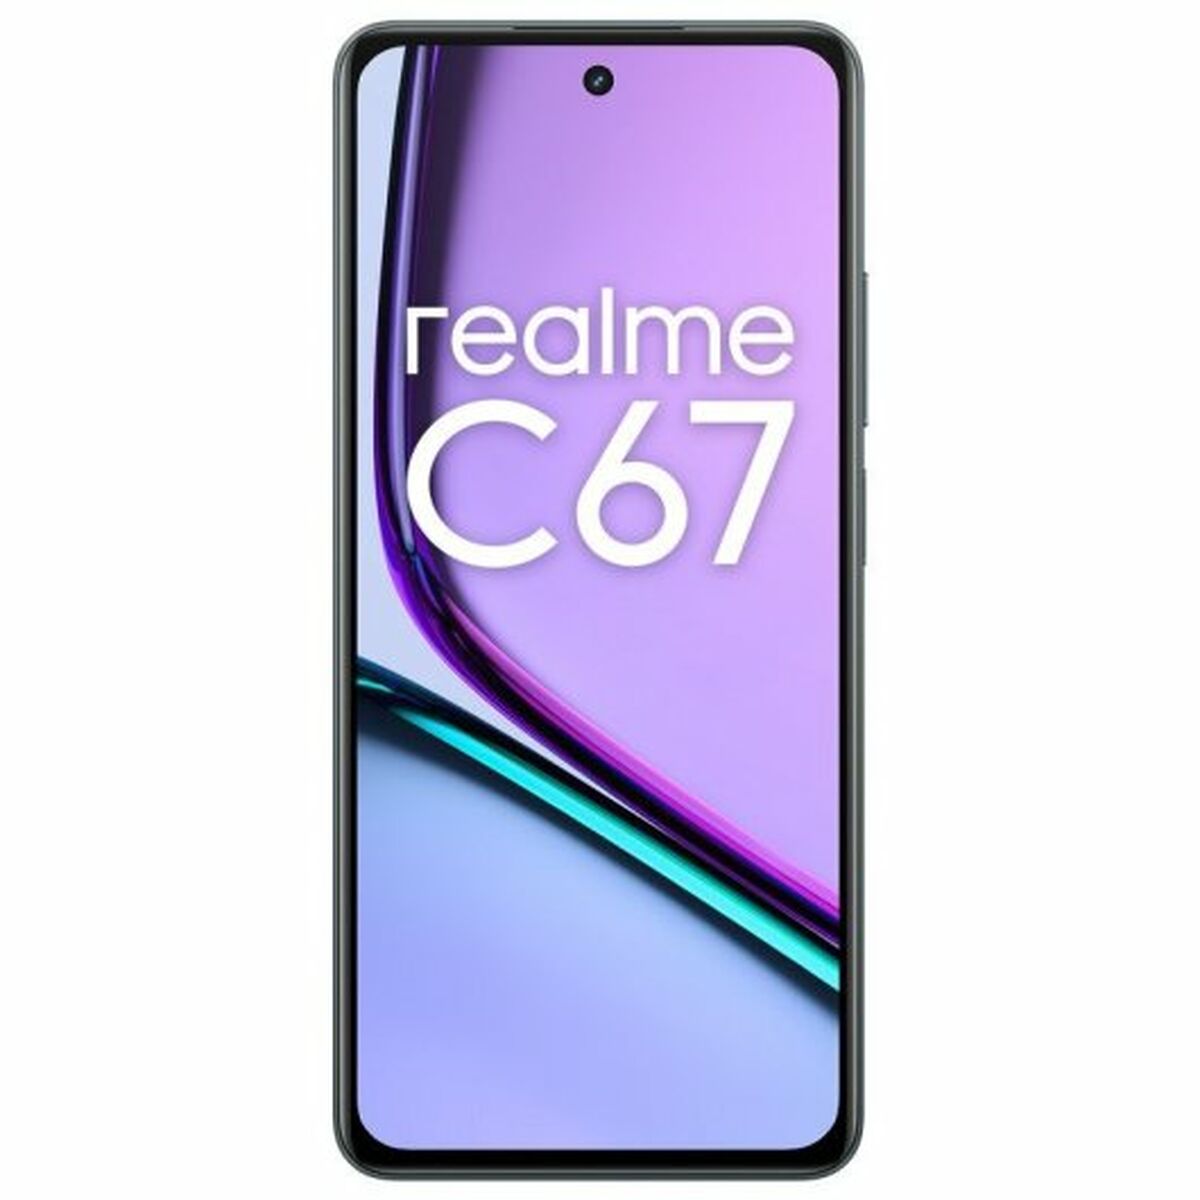 Smartphone Realme 631011001002 Octa Core 8 GB RAM 256 GB Black, Realme, Electronics, Mobile phones, smartphone-realme-631011001002-octa-core-8-gb-ram-256-gb-black, Brand_Realme, category-reference-2609, category-reference-2617, category-reference-2618, category-reference-t-19653, category-reference-t-19894, category-reference-t-21319, Condition_NEW, office, Price_200 - 300, telephones & tablets, Teleworking, wifi y bluetooth, RiotNook